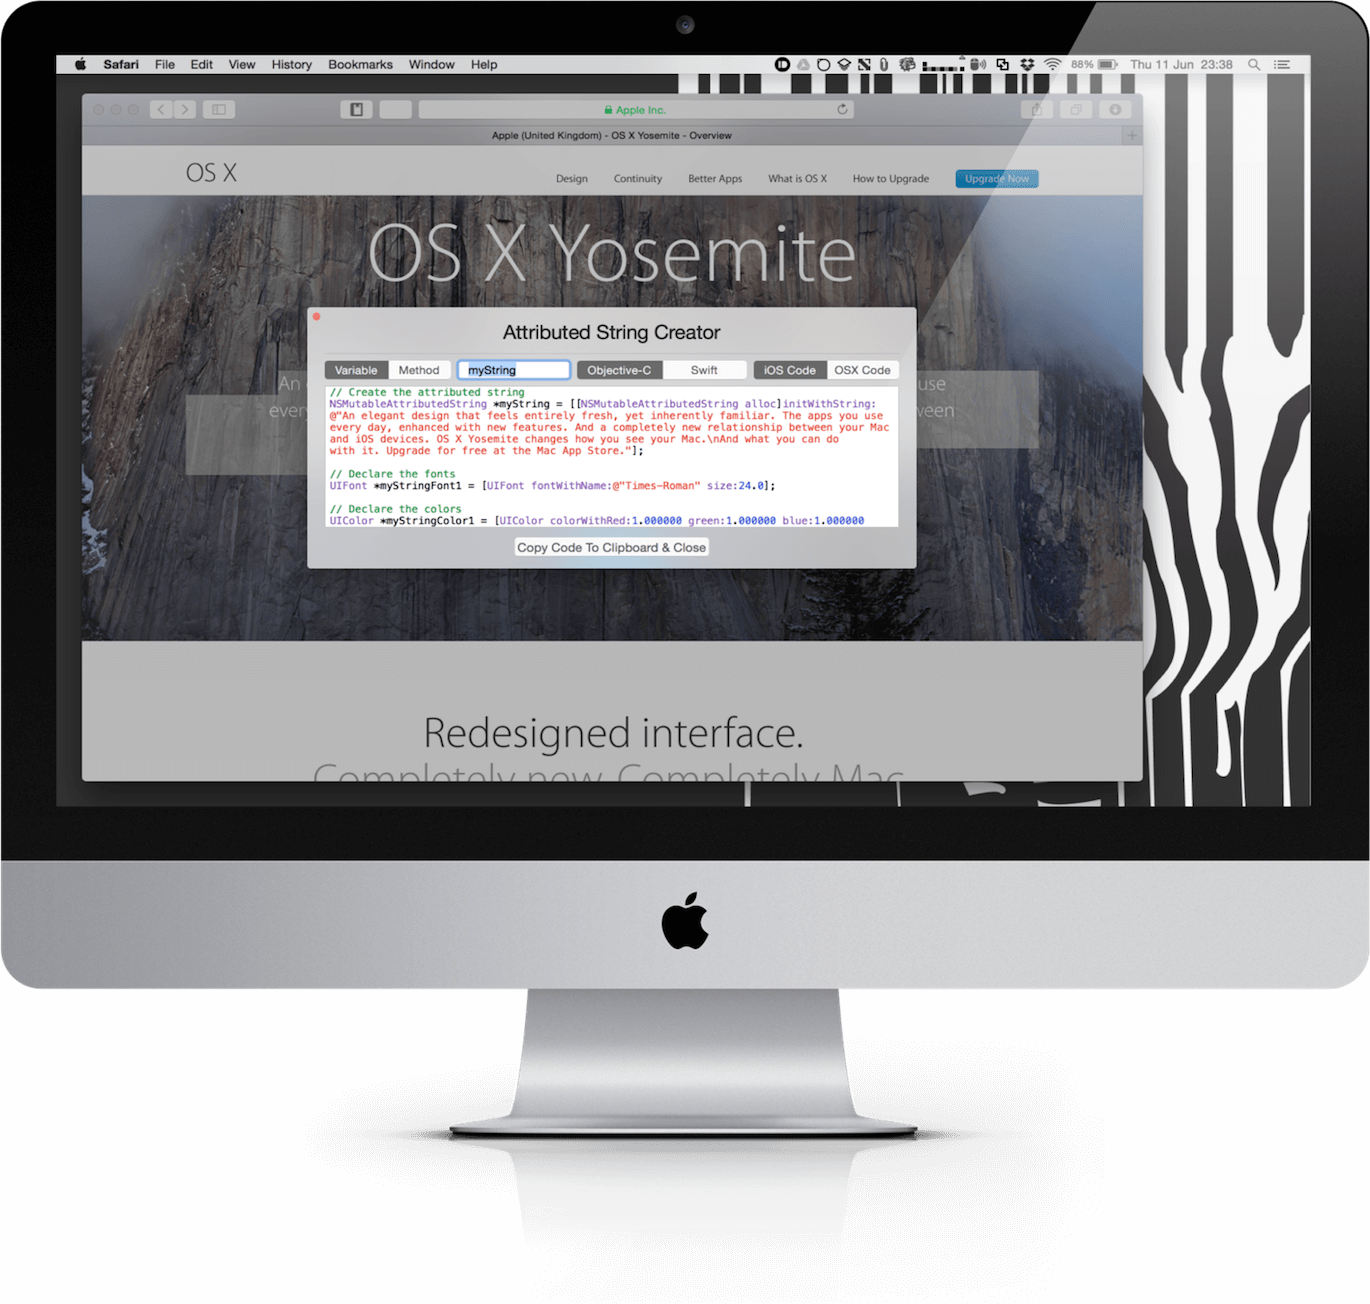 Attributed String Creator macOS app extension running on an iMac, converting text from the Safari browser